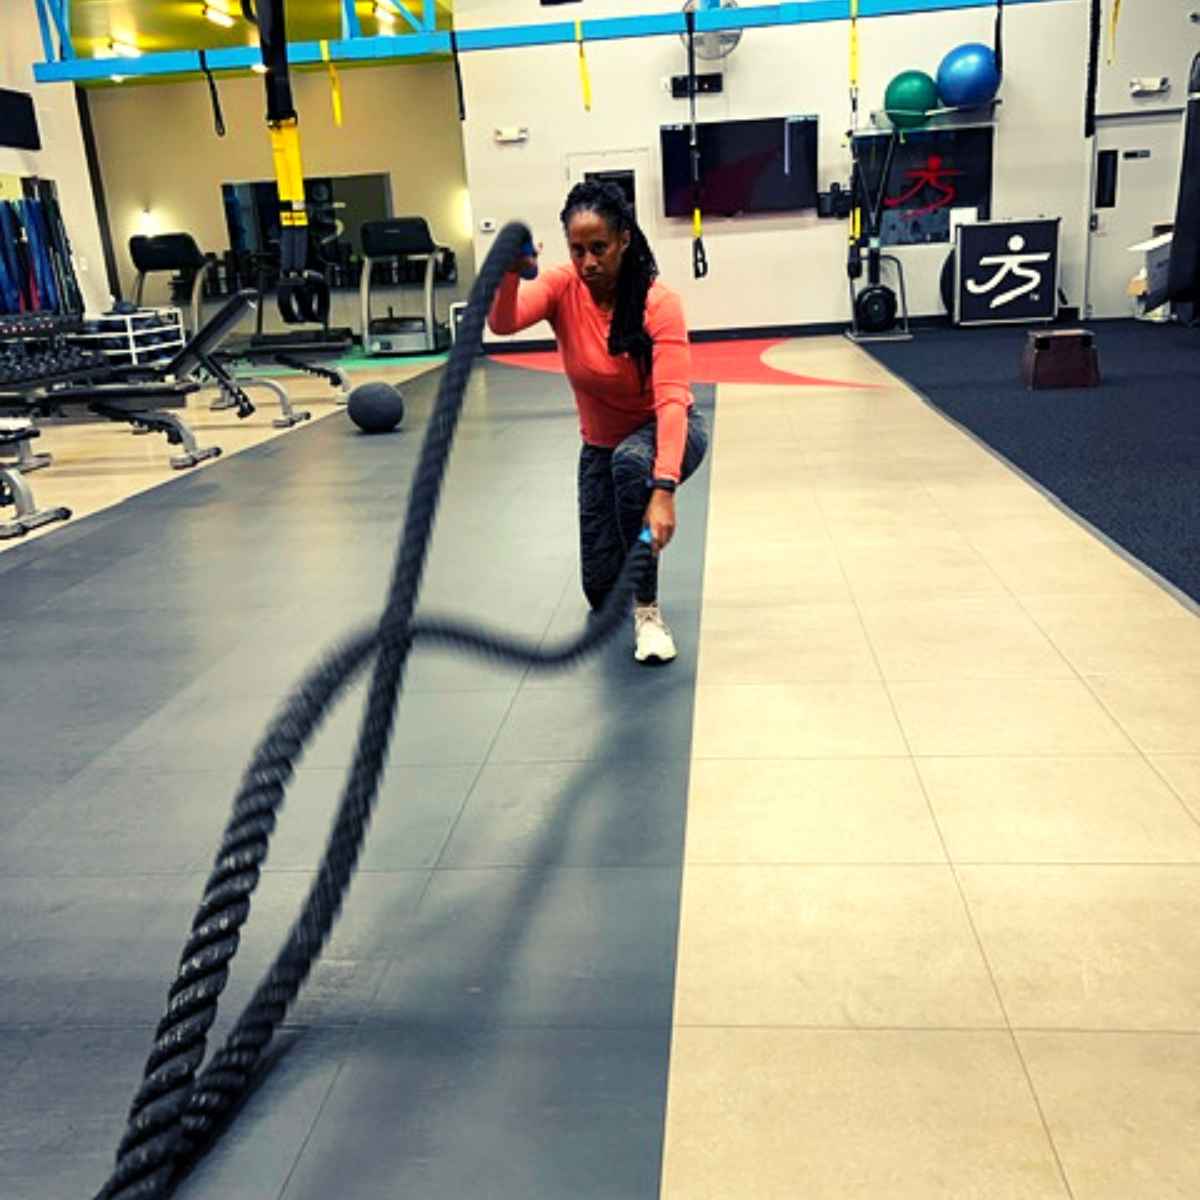 Transform your body: HIIT battle rope workout